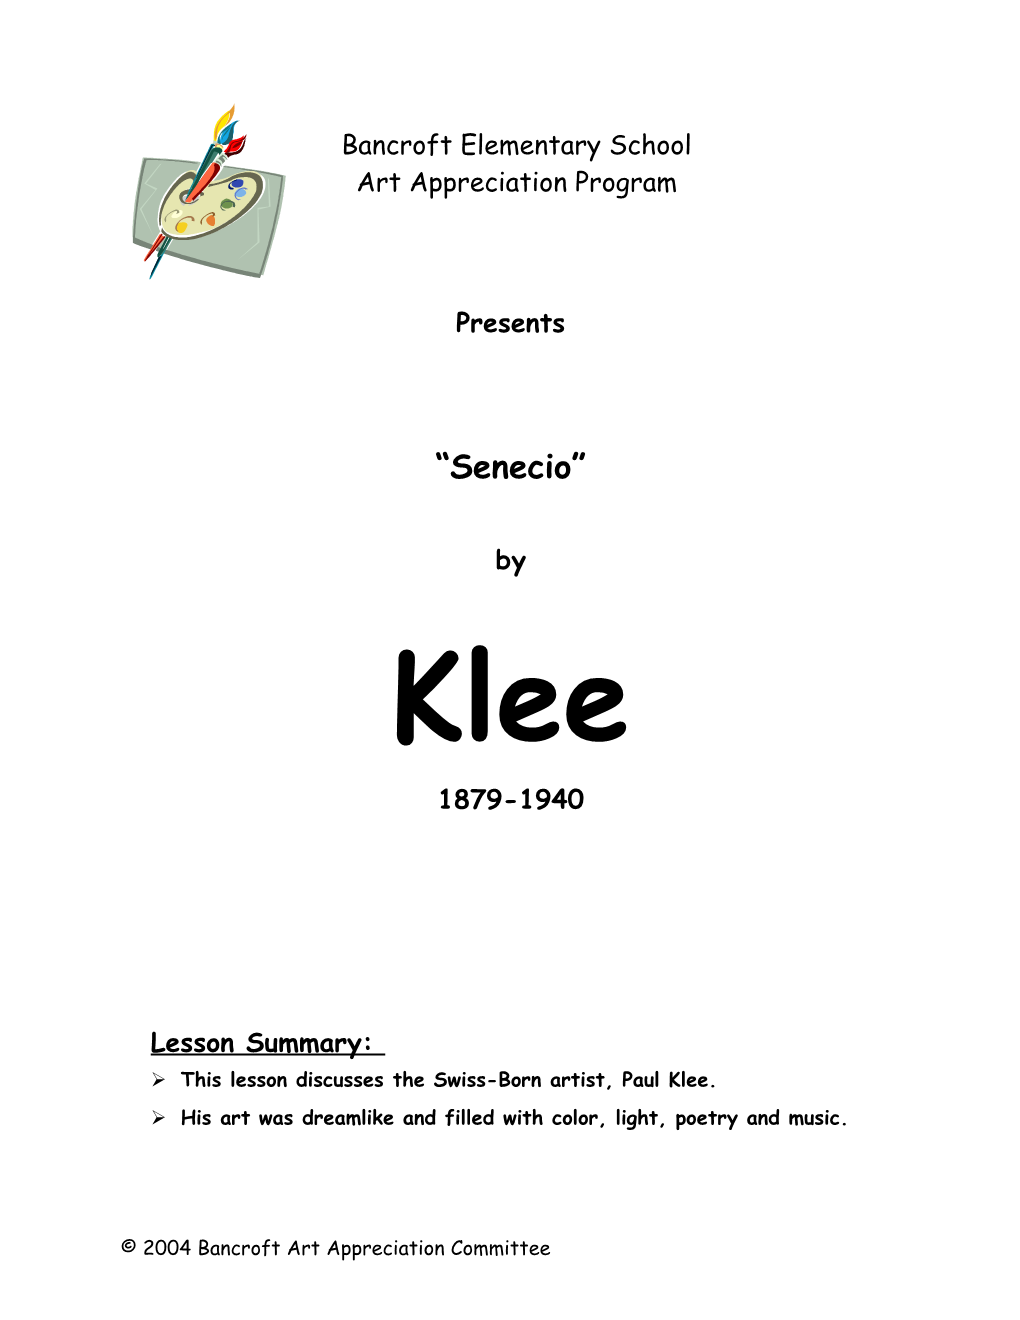 This Lesson Discusses the Swiss-Born Artist, Paul Klee